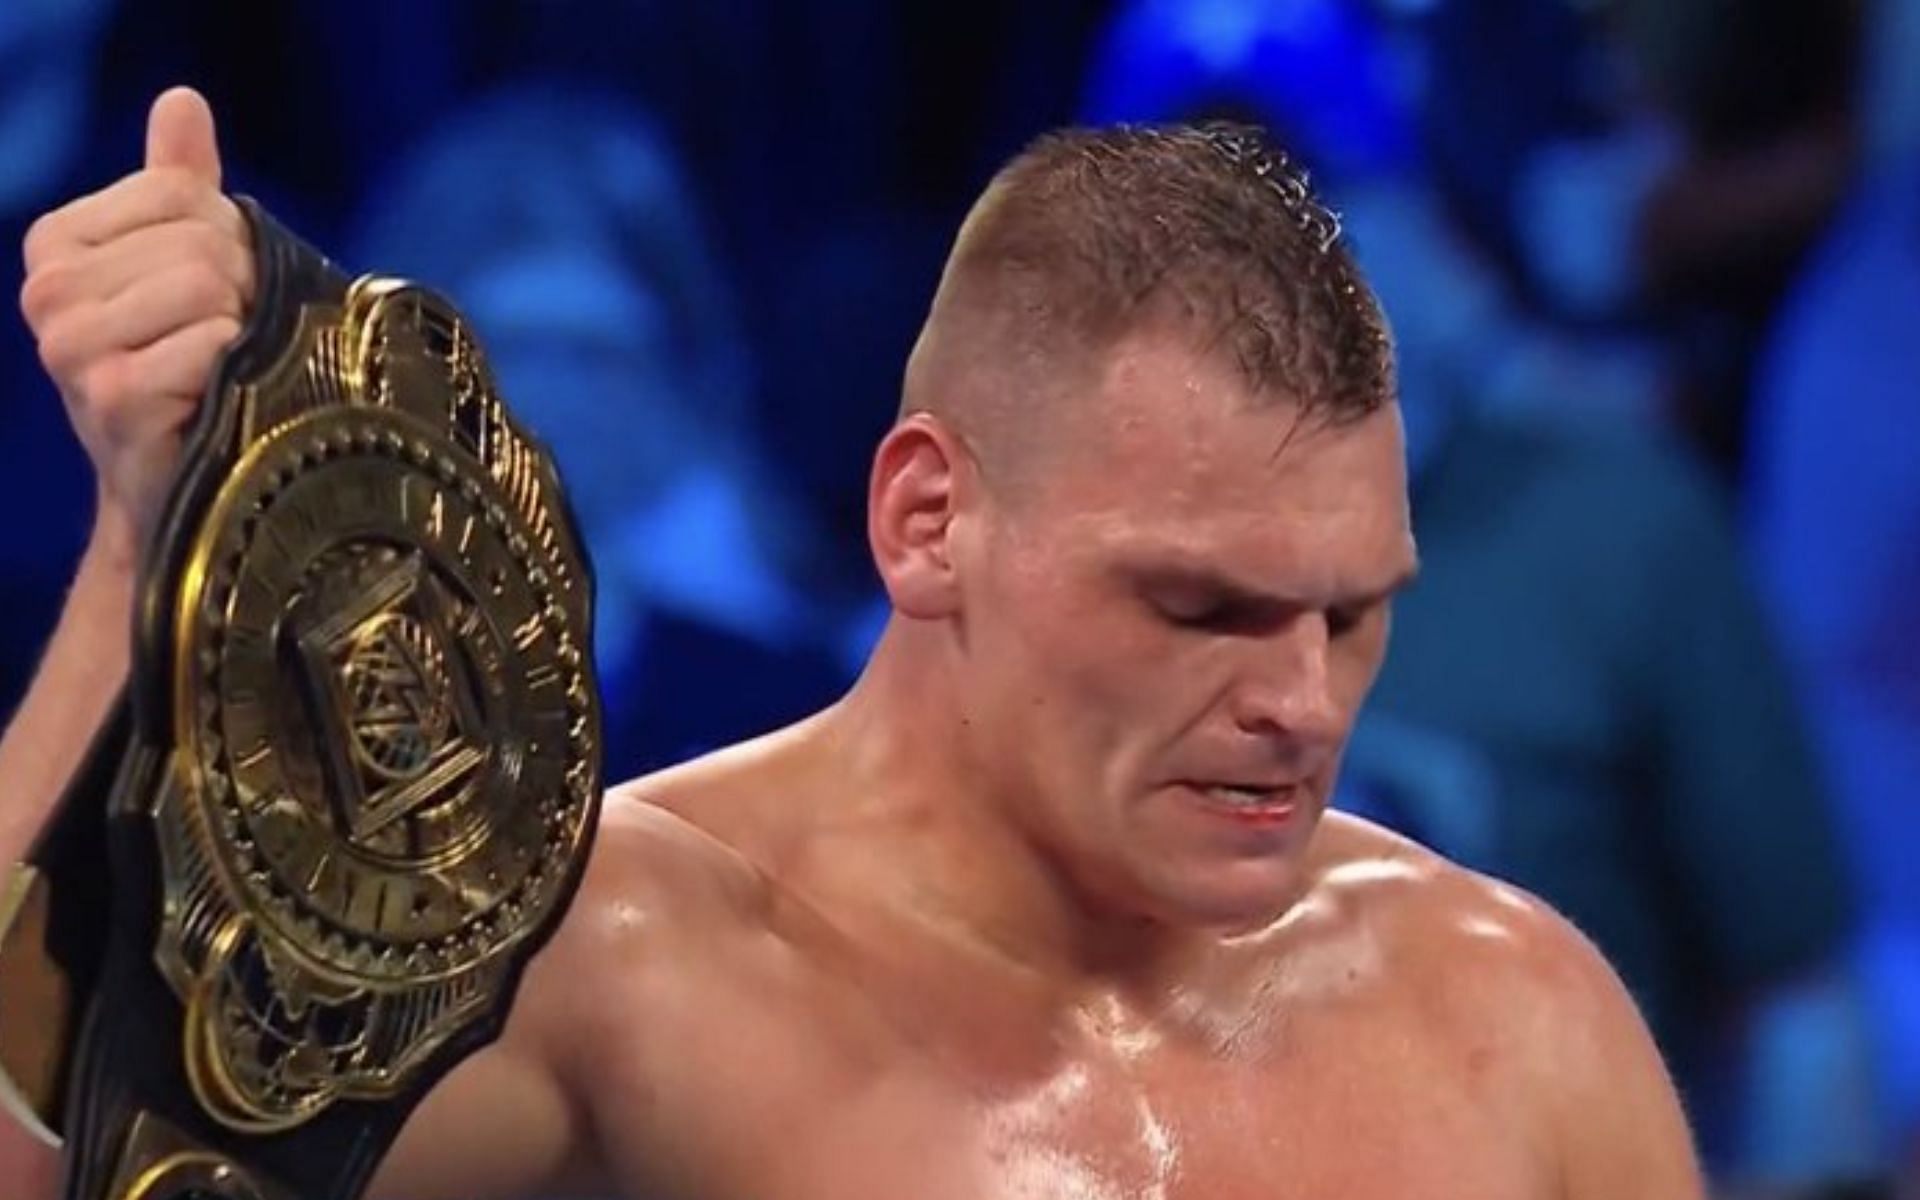 The Intercontinental title match on SmackDown ended controversially